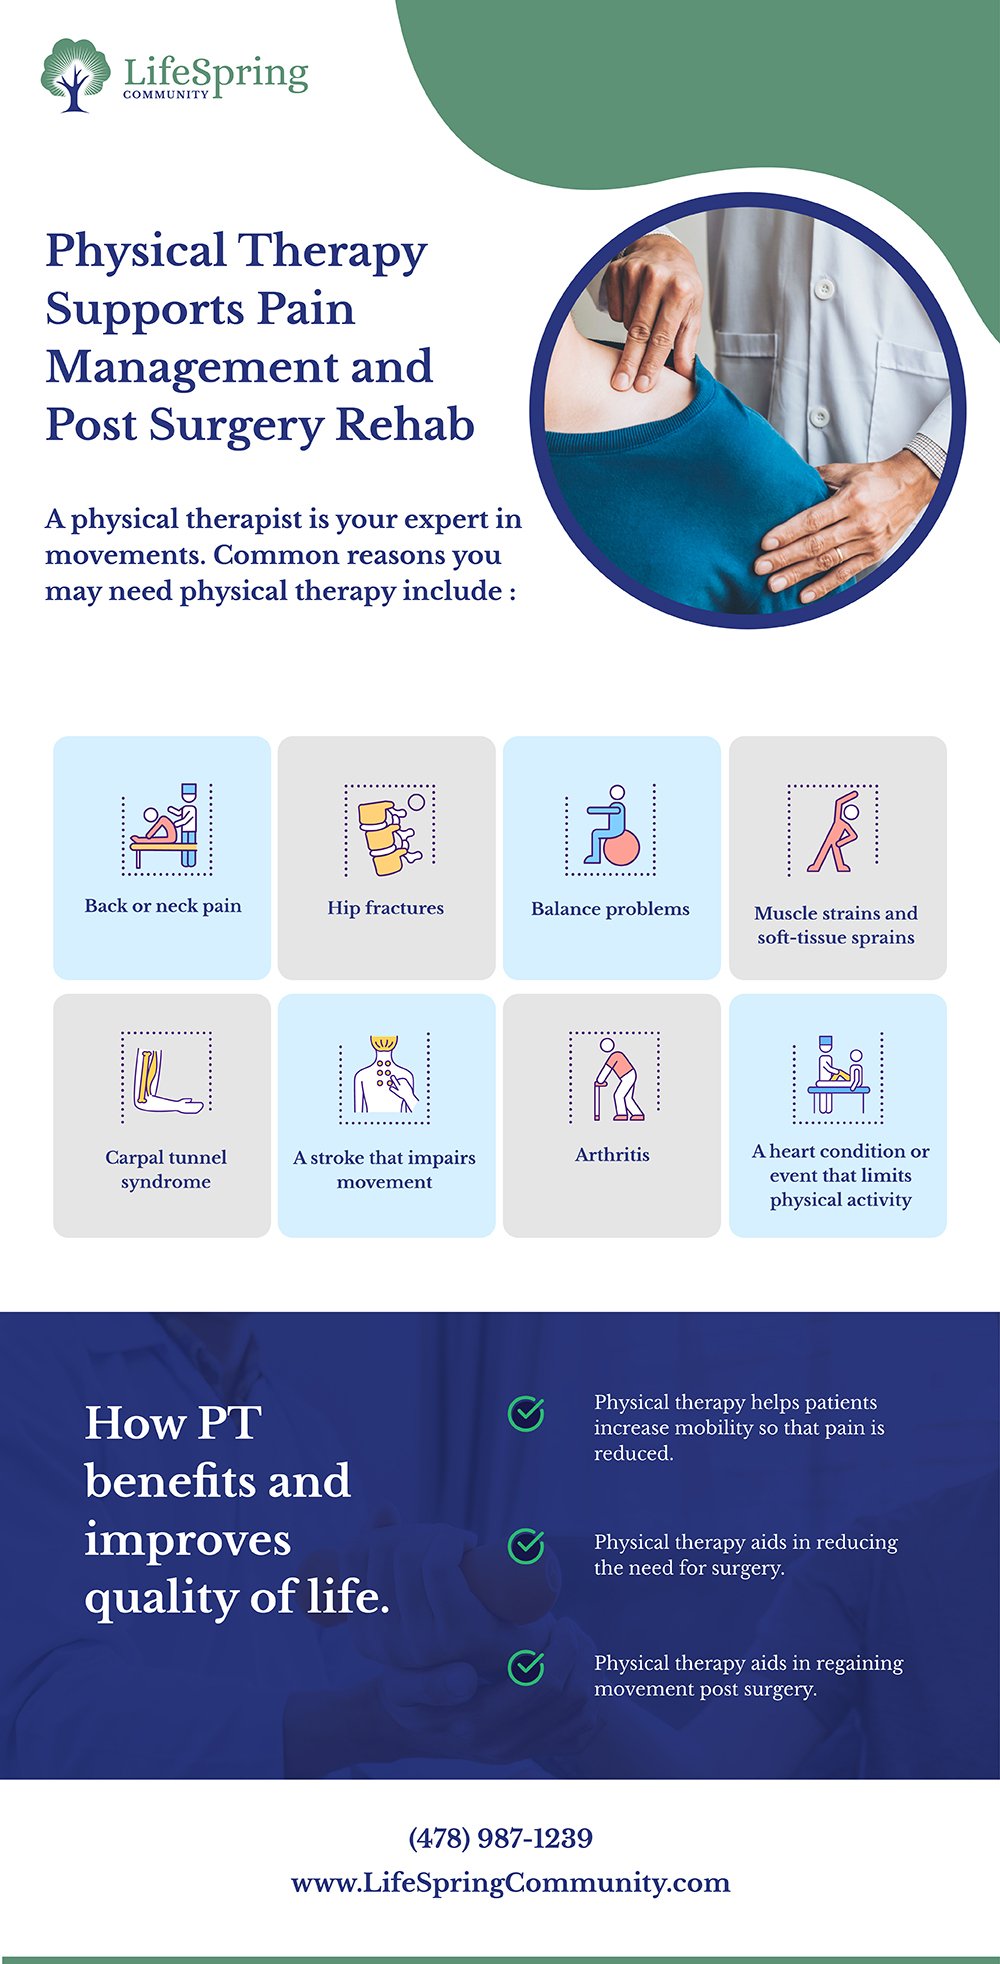 Benefits of Physical Therapy_61022-01 (1)